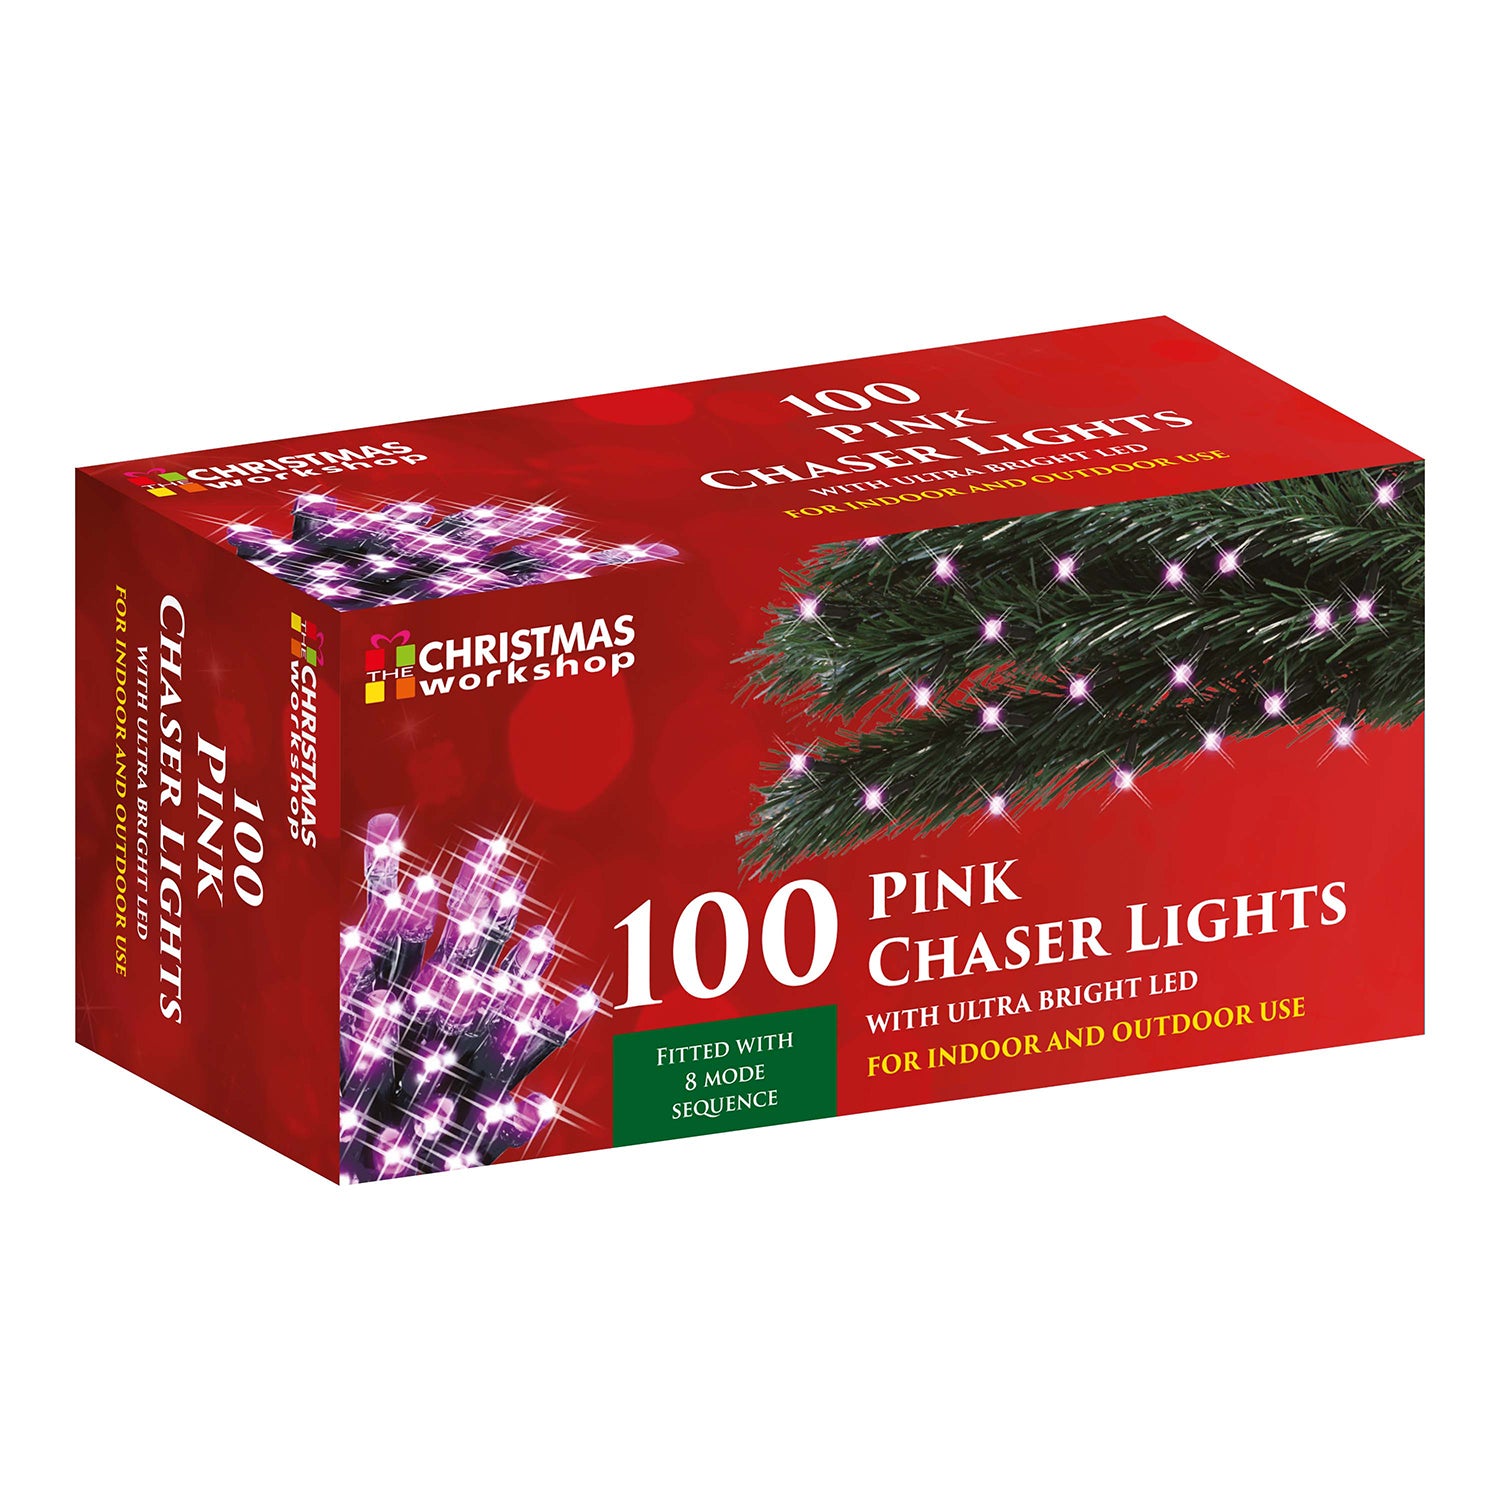 100 Bright Pink LED Christmas 8 Mode Fairy Chaser Lights